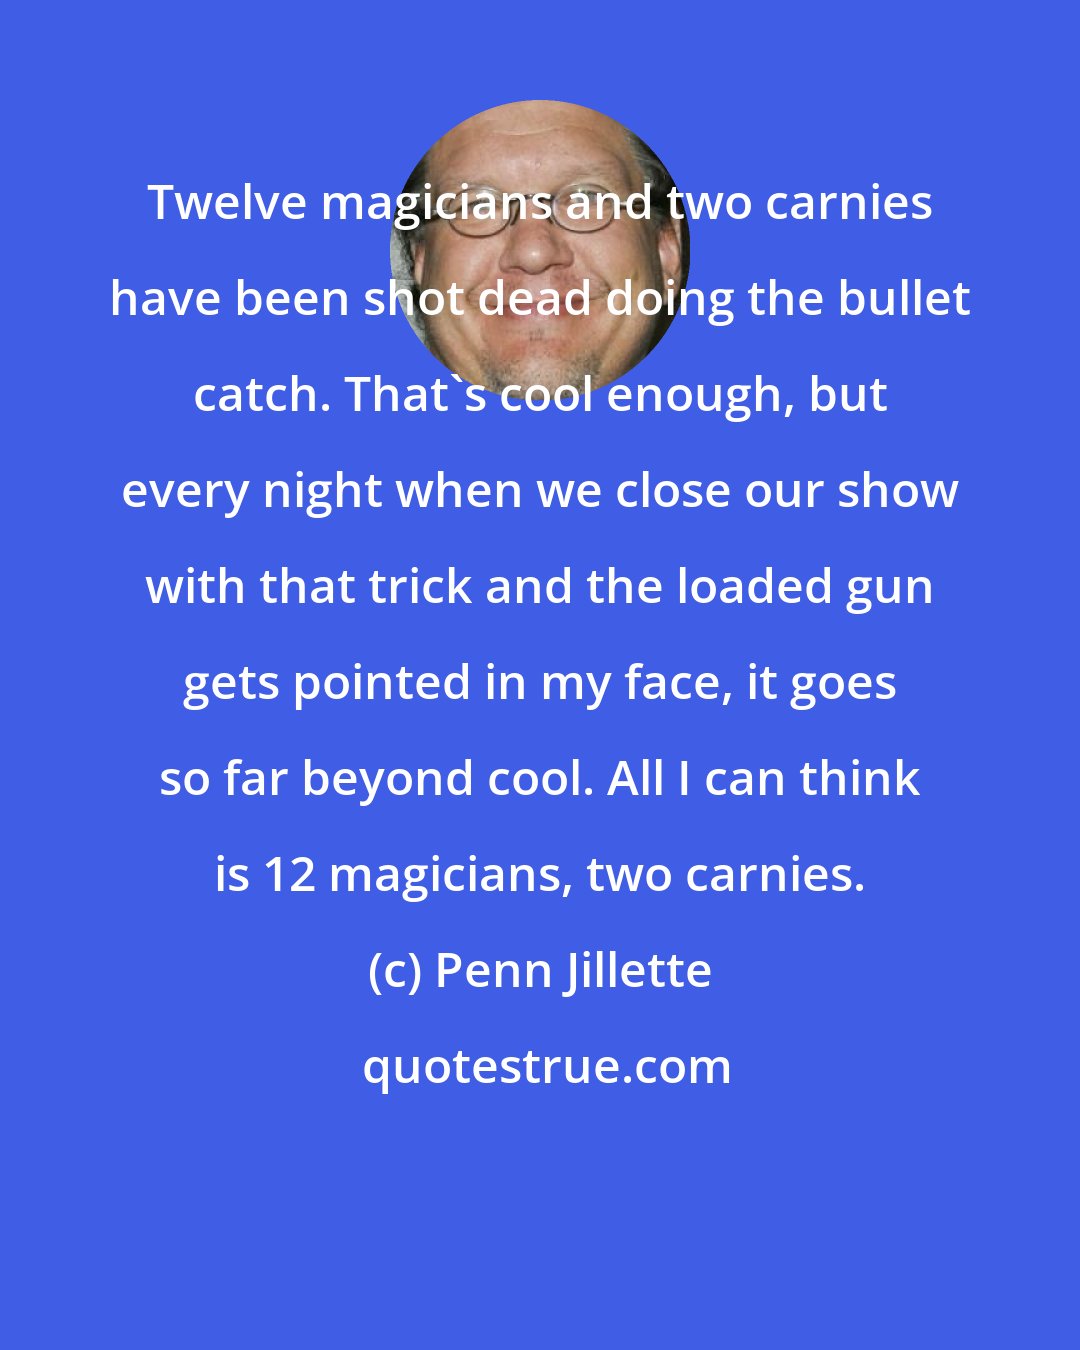 Penn Jillette: Twelve magicians and two carnies have been shot dead doing the bullet catch. That's cool enough, but every night when we close our show with that trick and the loaded gun gets pointed in my face, it goes so far beyond cool. All I can think is 12 magicians, two carnies.